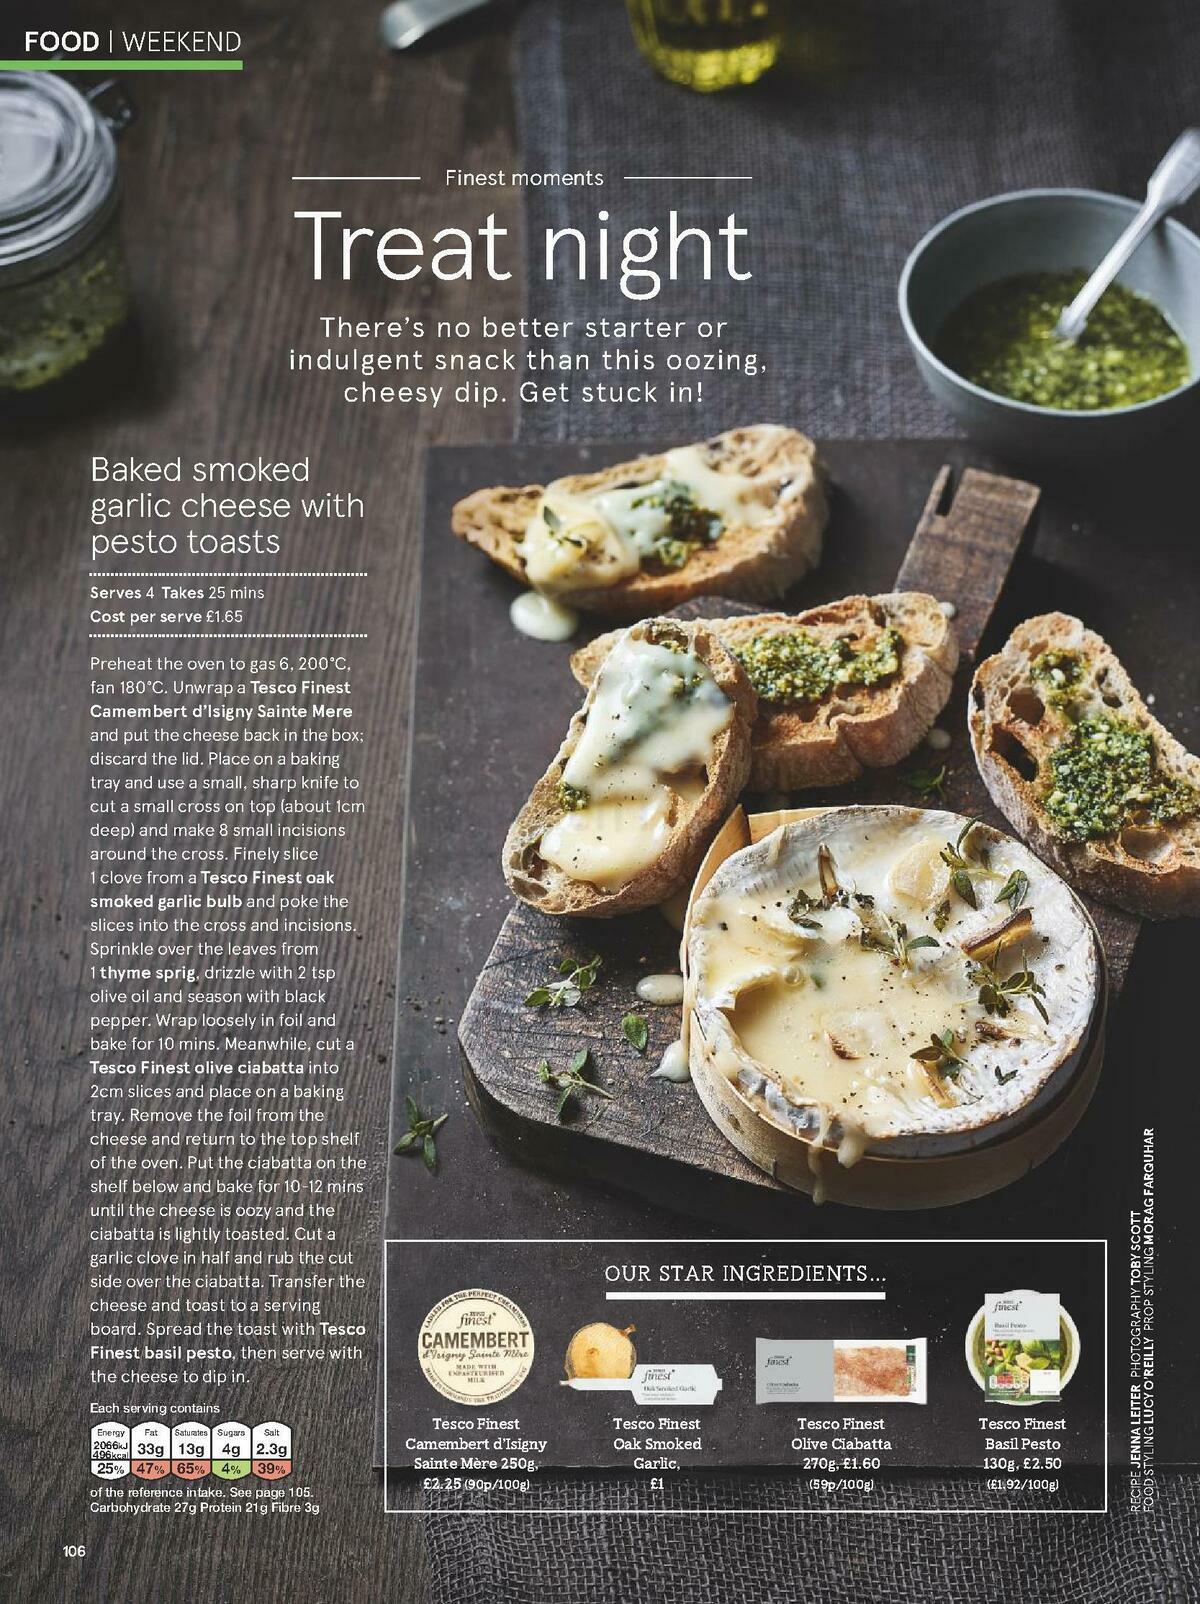 TESCO Magazine March Offers from 1 March